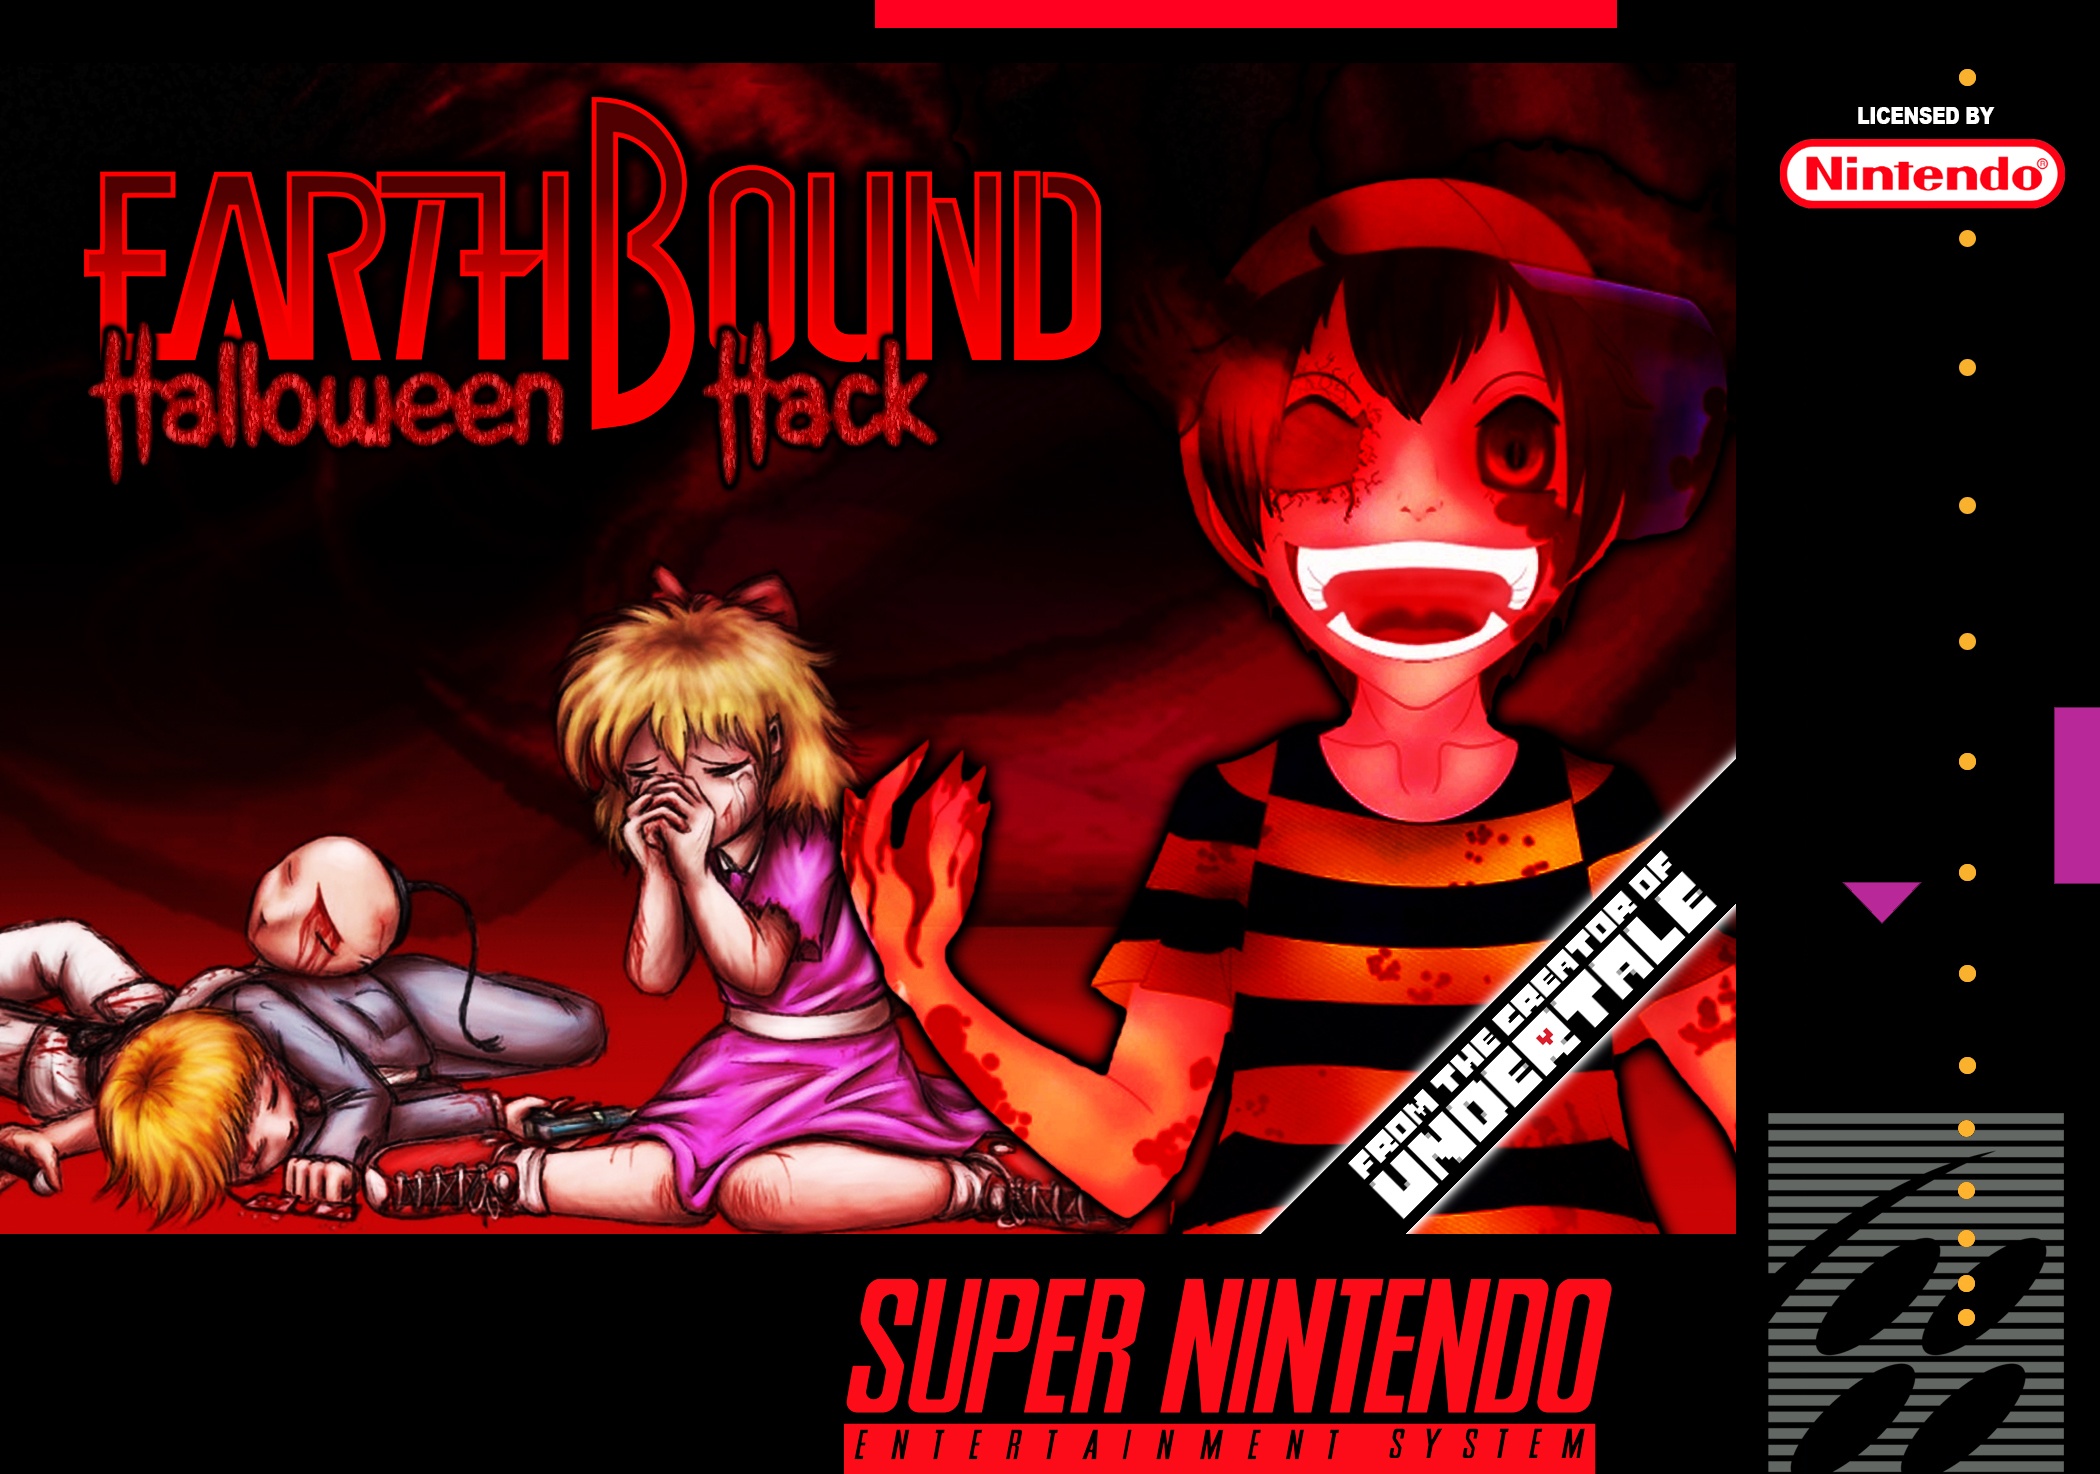 Earthbound: Halloween Hack box cover